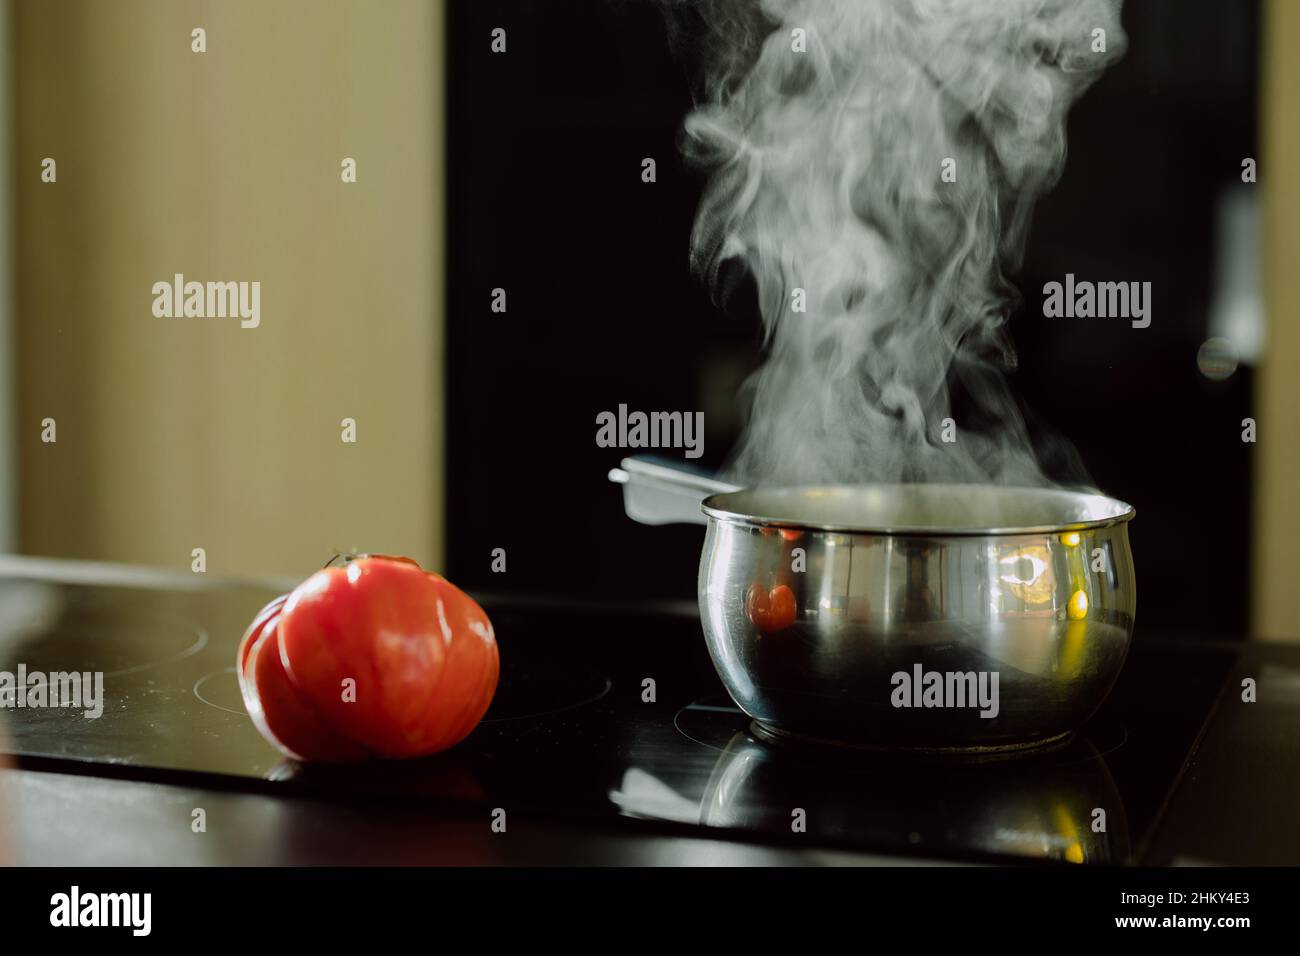 View of the tomato near the saucepan on the electric stove with the steam coming out from it Stock Photo